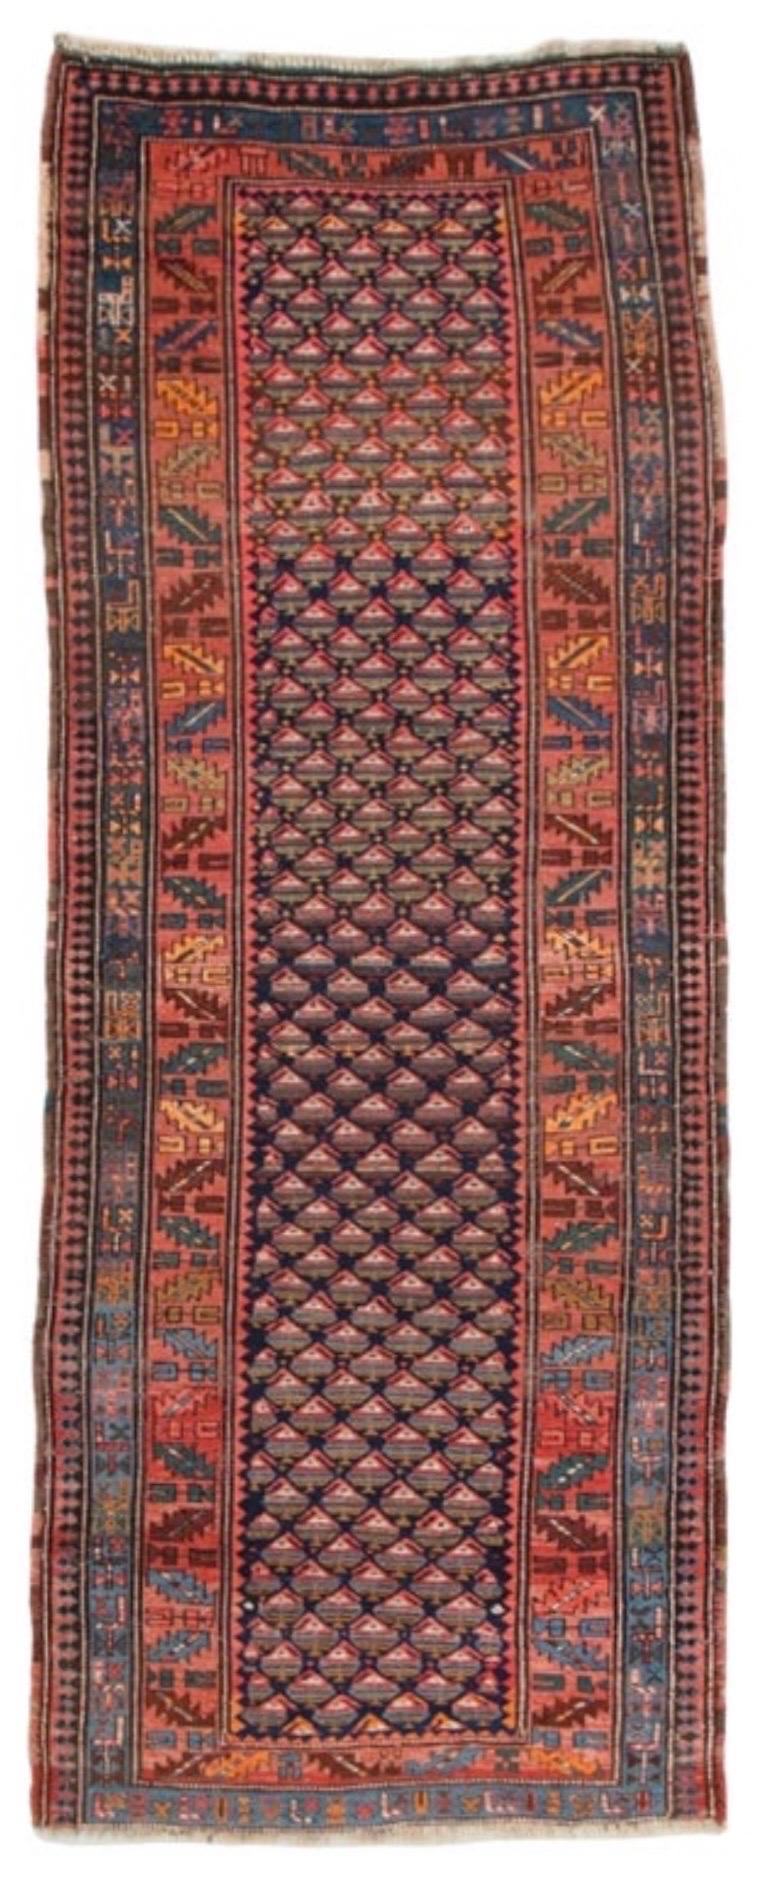 Antique Blue Tribal Geometric Persian Kurd Runner Rug c. 1900 3.10 x 10.5 ft In Good Condition For Sale In New York, NY